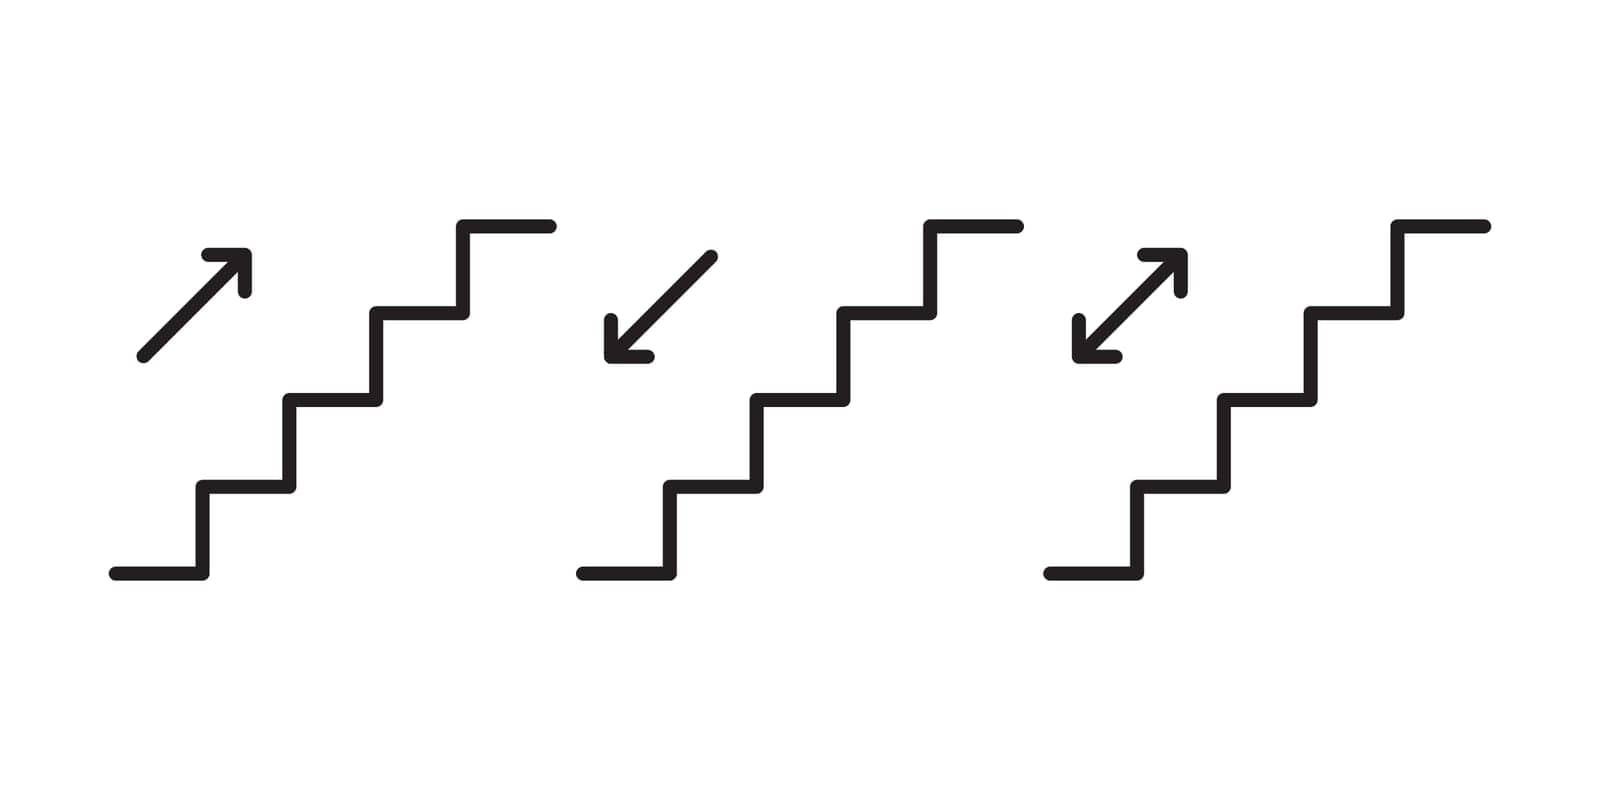 Stairs icon set with arrows by misteremil